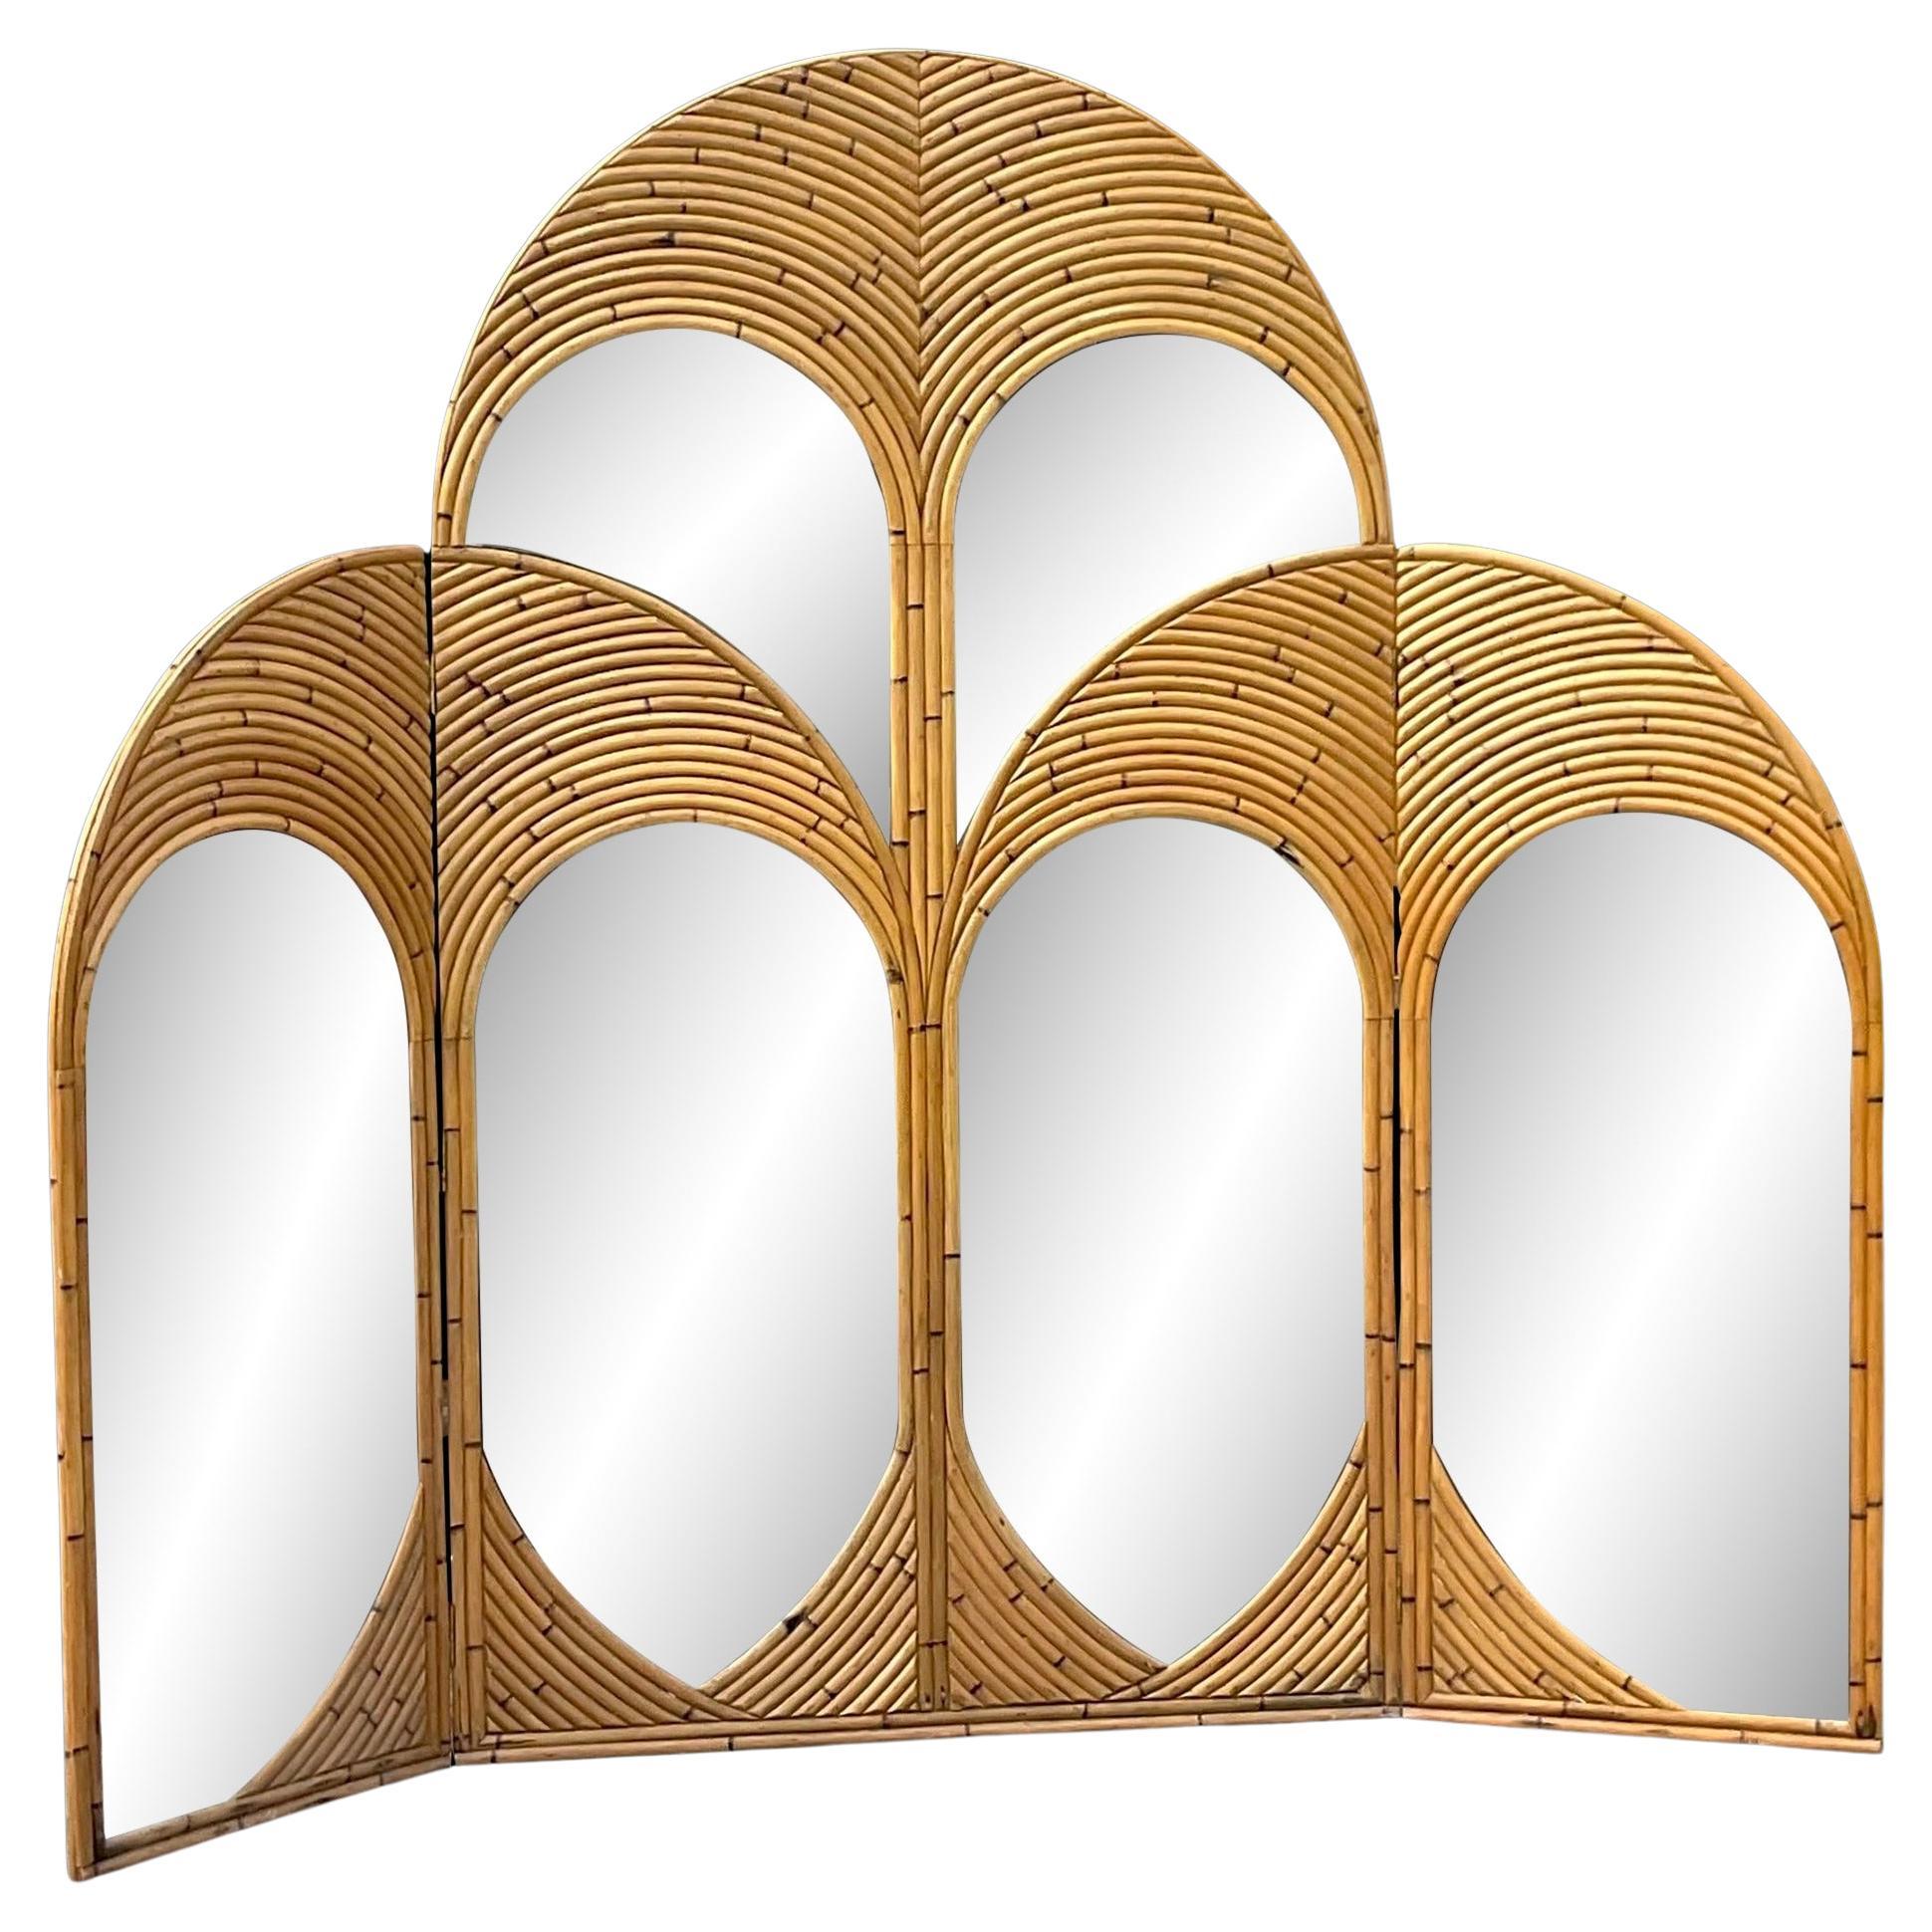 Vintage Coastal Arched Bent Rattan Mirrored Screen